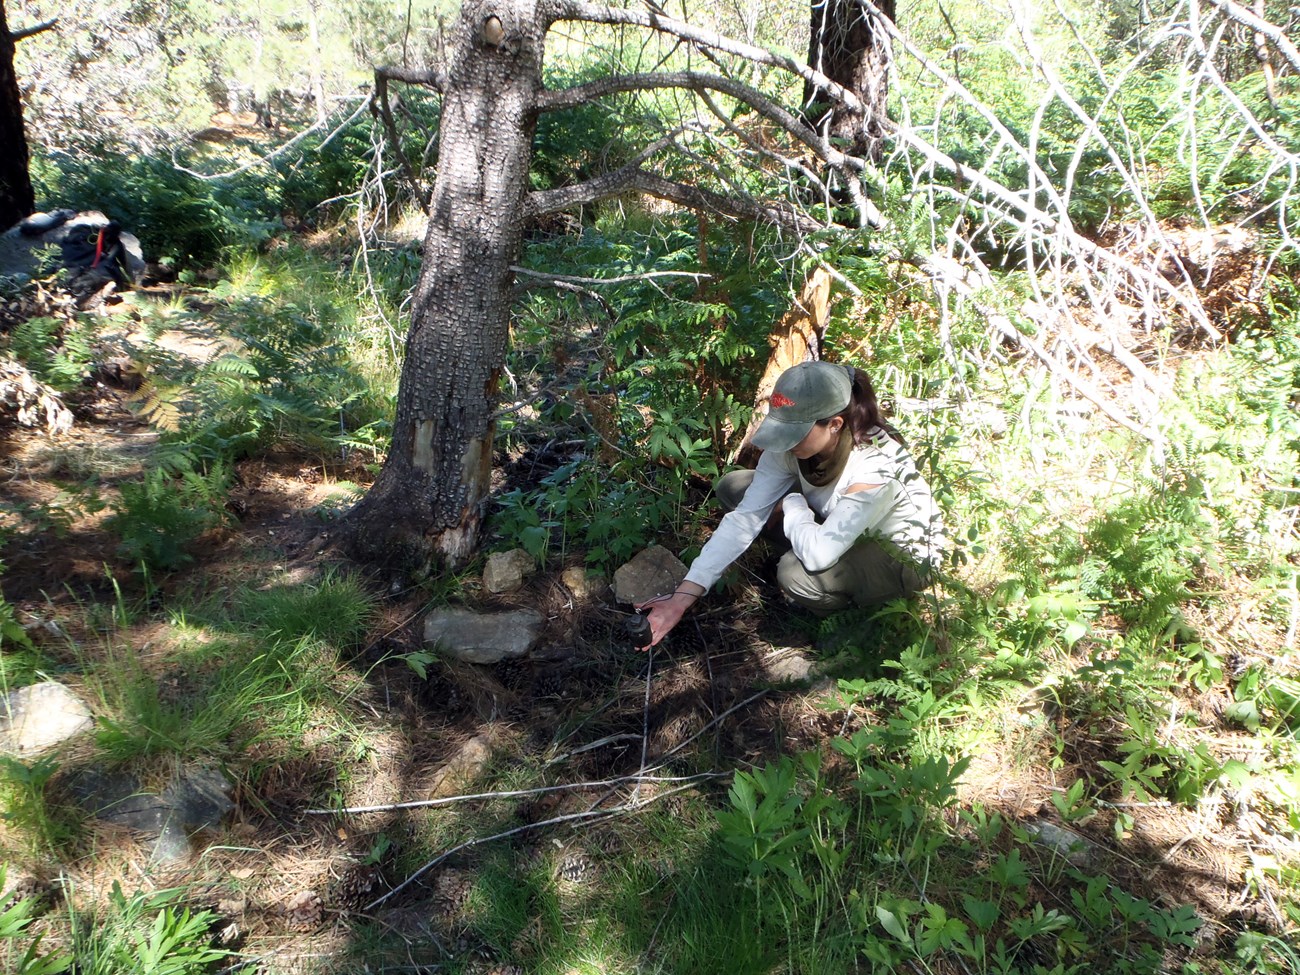 A person sitting on the forest floor holding a small, cylindrical, plastic sensor above the ground where it was found buried in sediment.